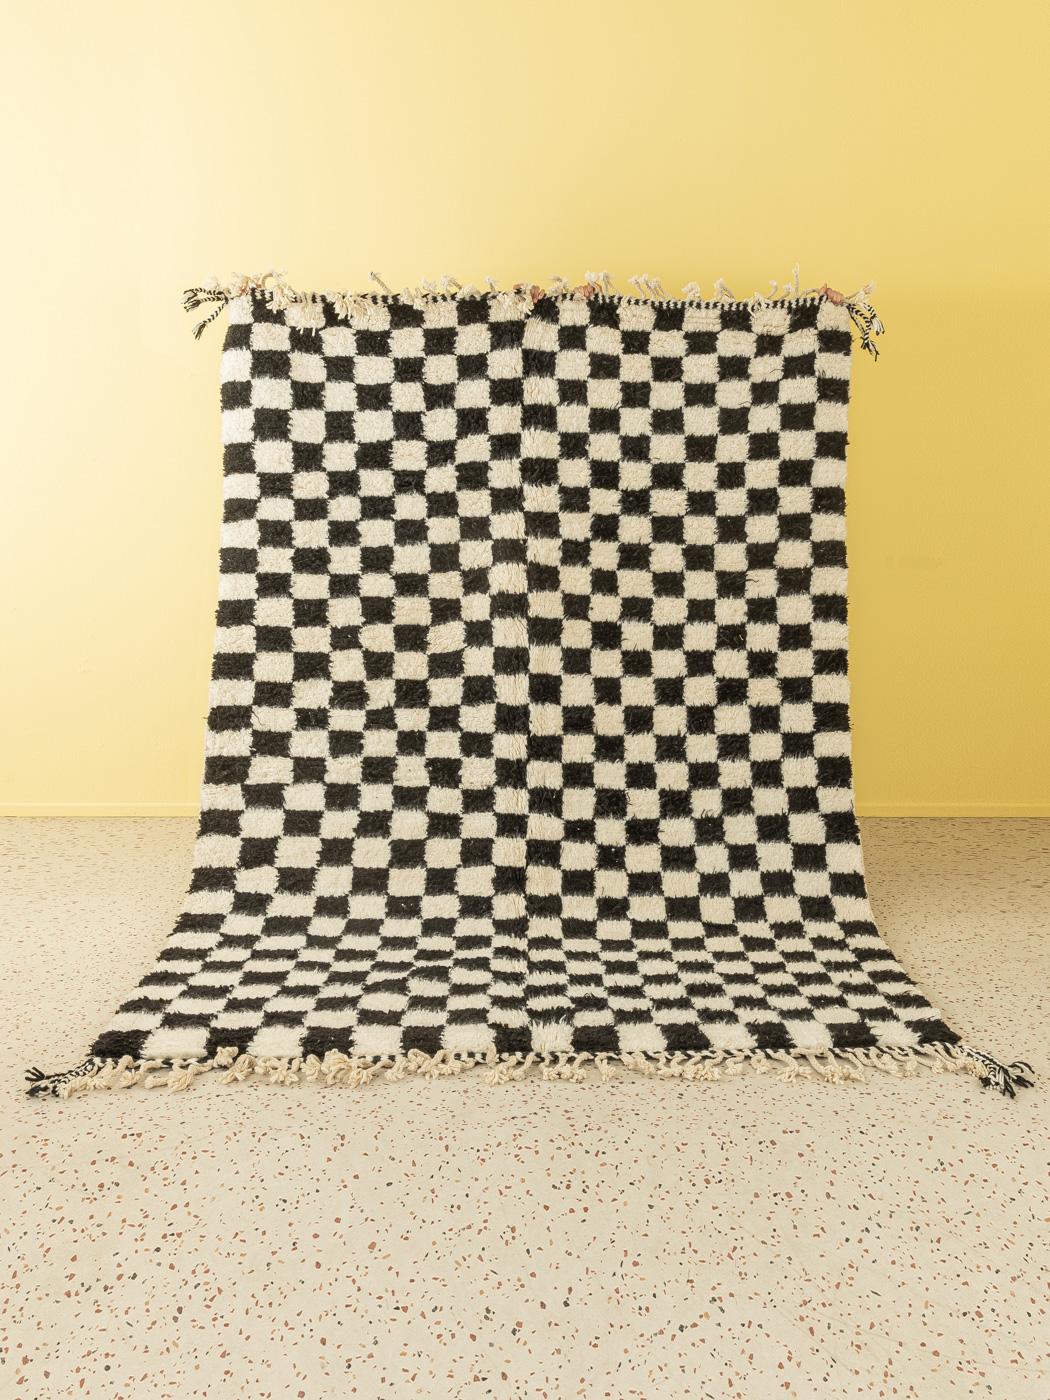 Classic Chess is a contemporary 100% wool rug – thick and soft, comfortable underfoot. Our Berber rugs are handwoven and handknotted by Amazigh women in the Atlas Mountains. These communities have been crafting rugs for thousands of years. One knot